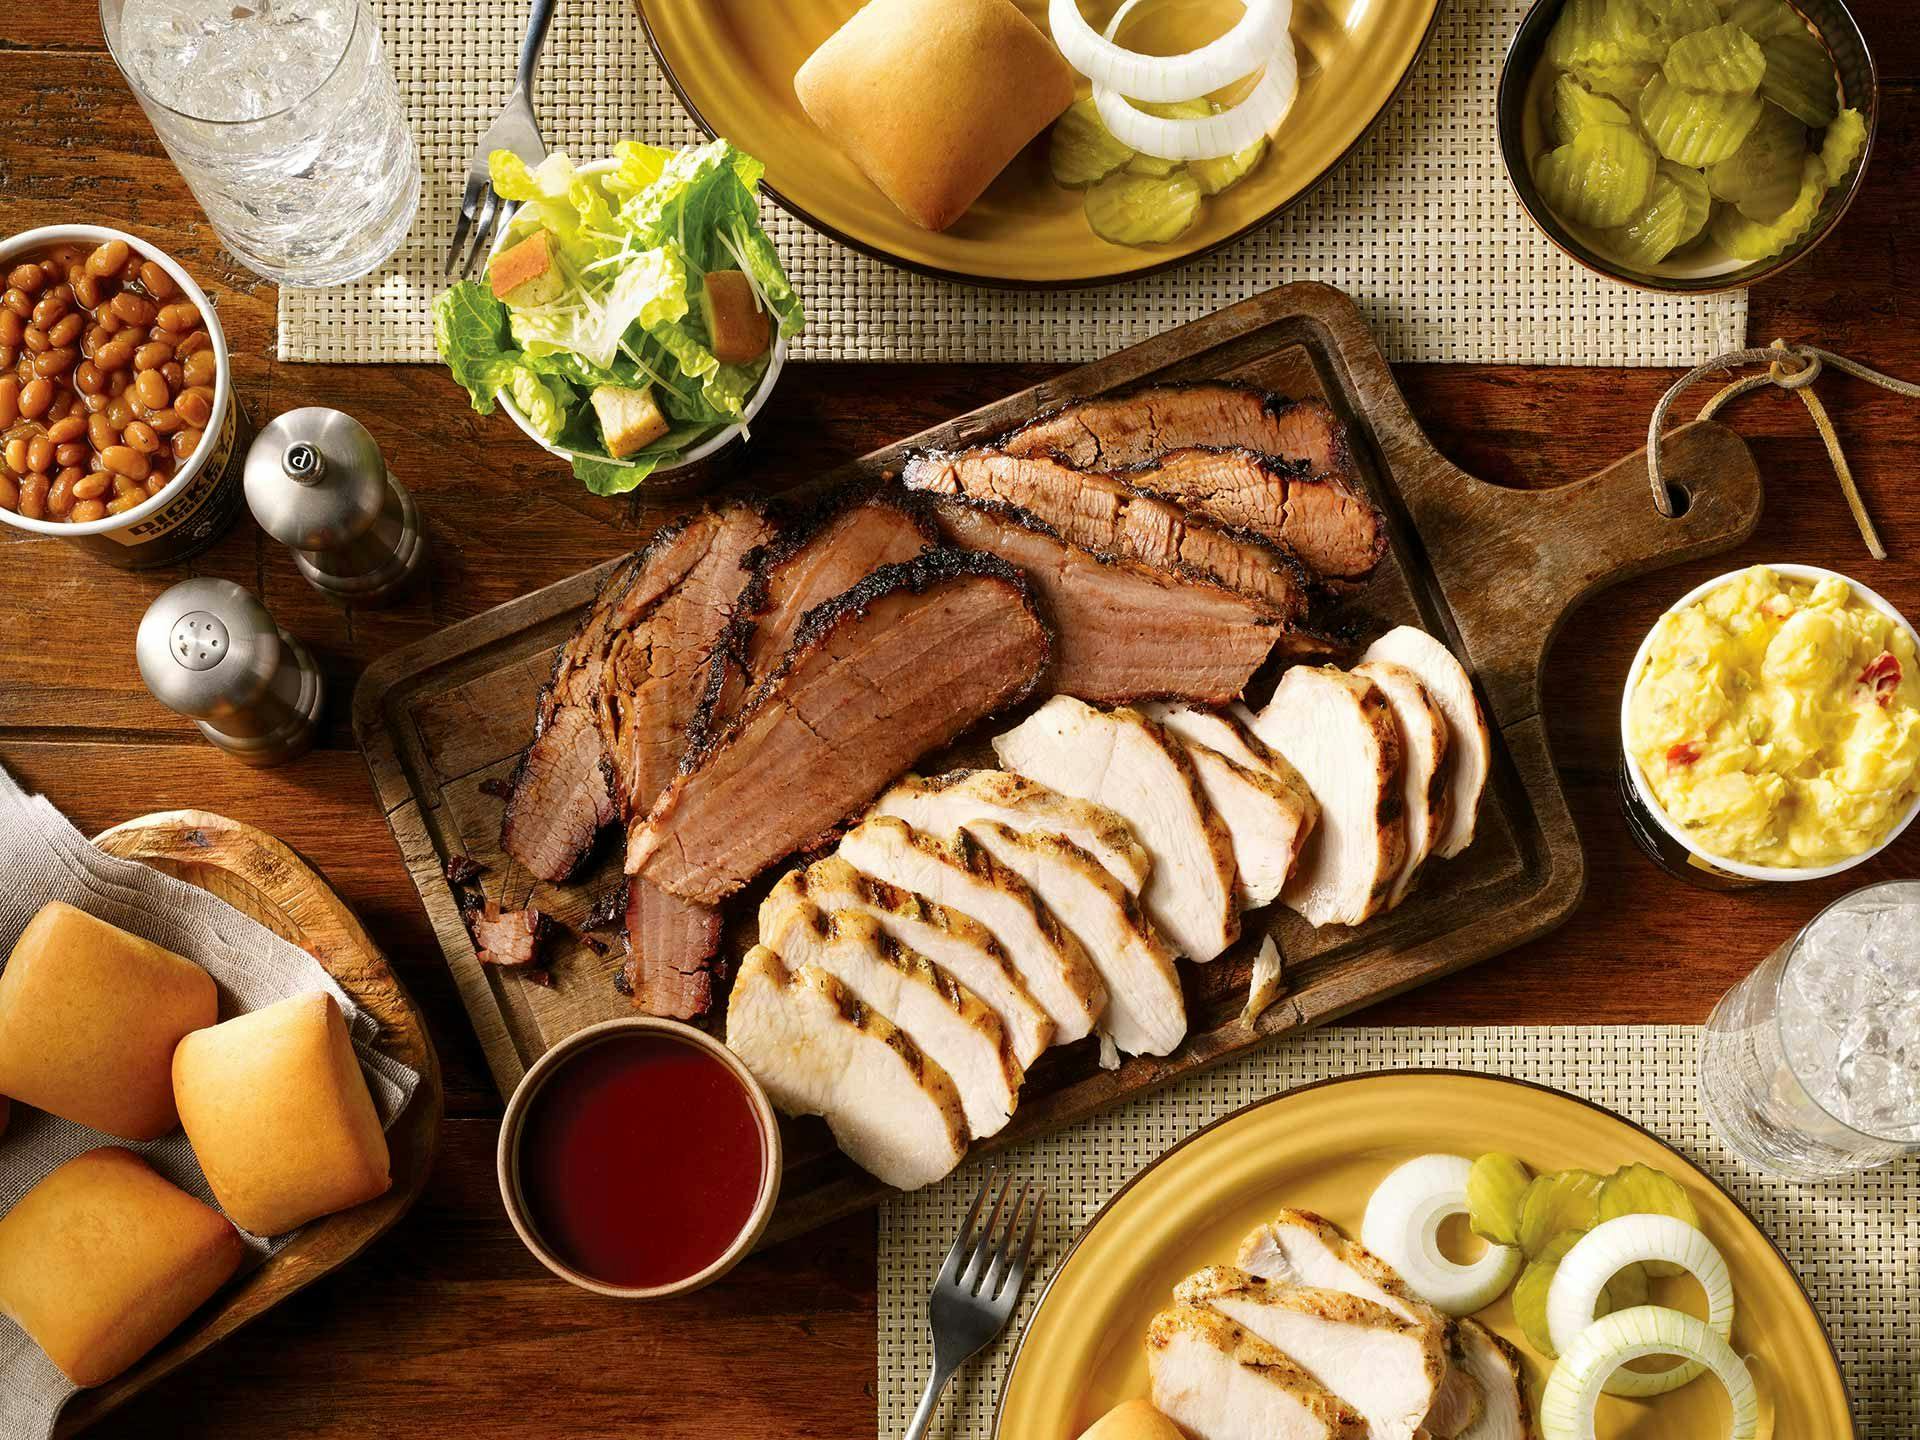 Long Island Native Brings Dickey’s Barbecue Pit to Centereach, NY